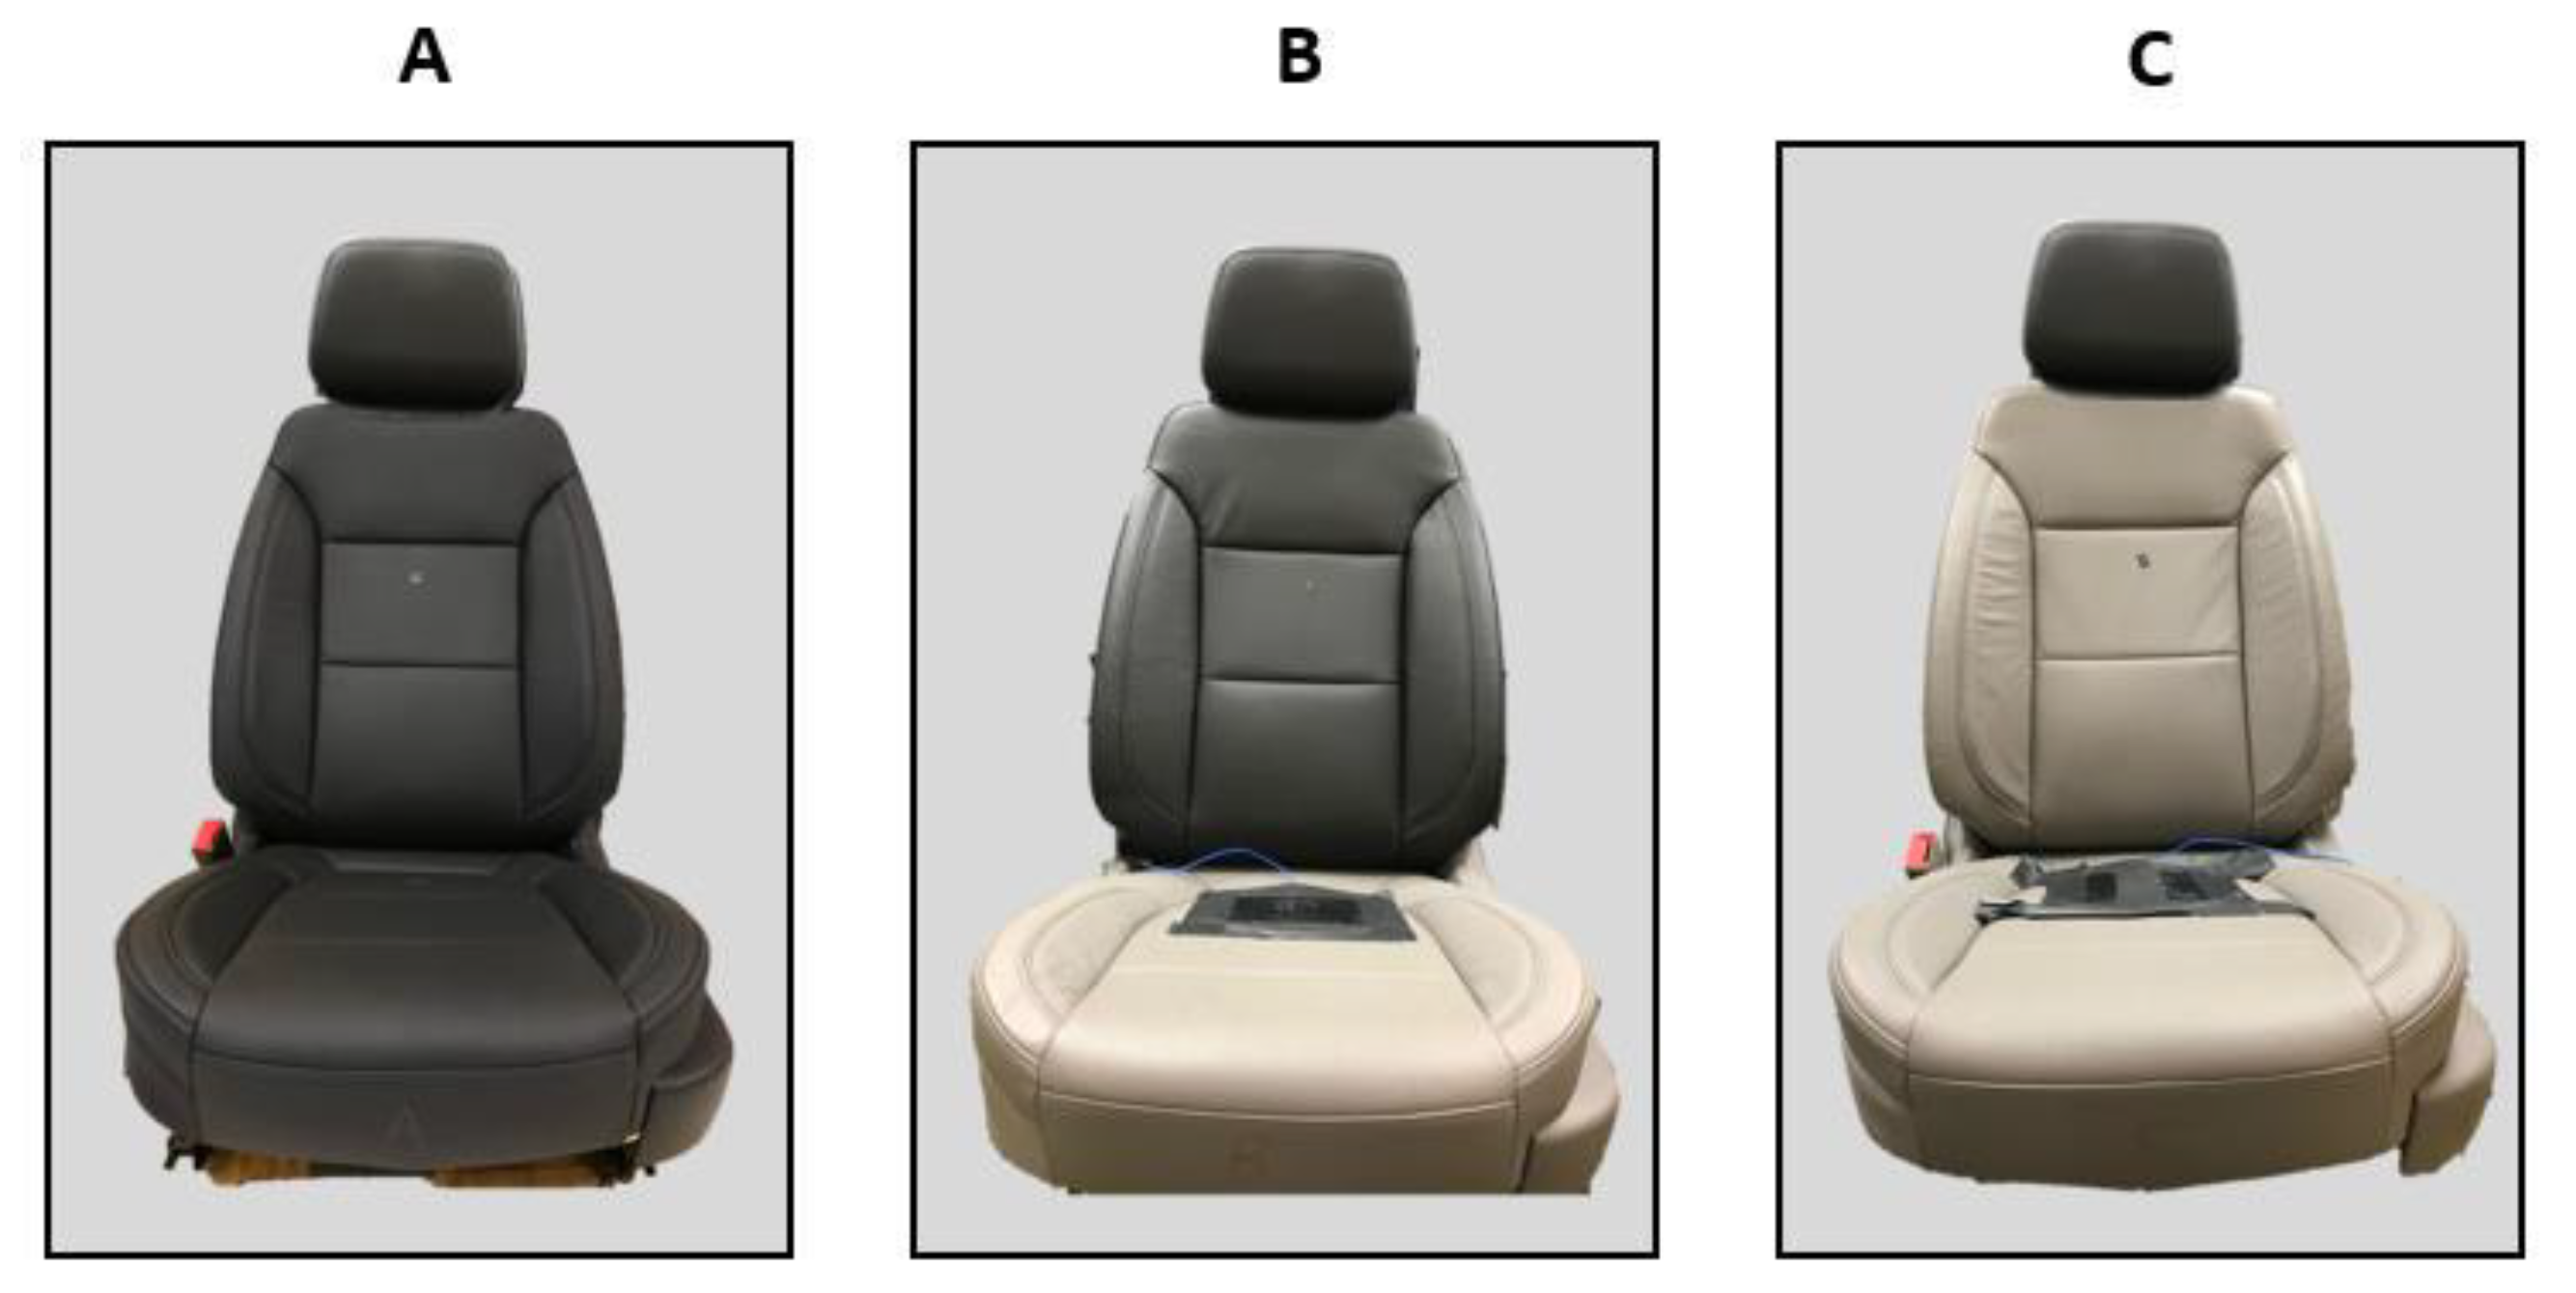 Comparative Study of different Seat Cushion Materials to improve